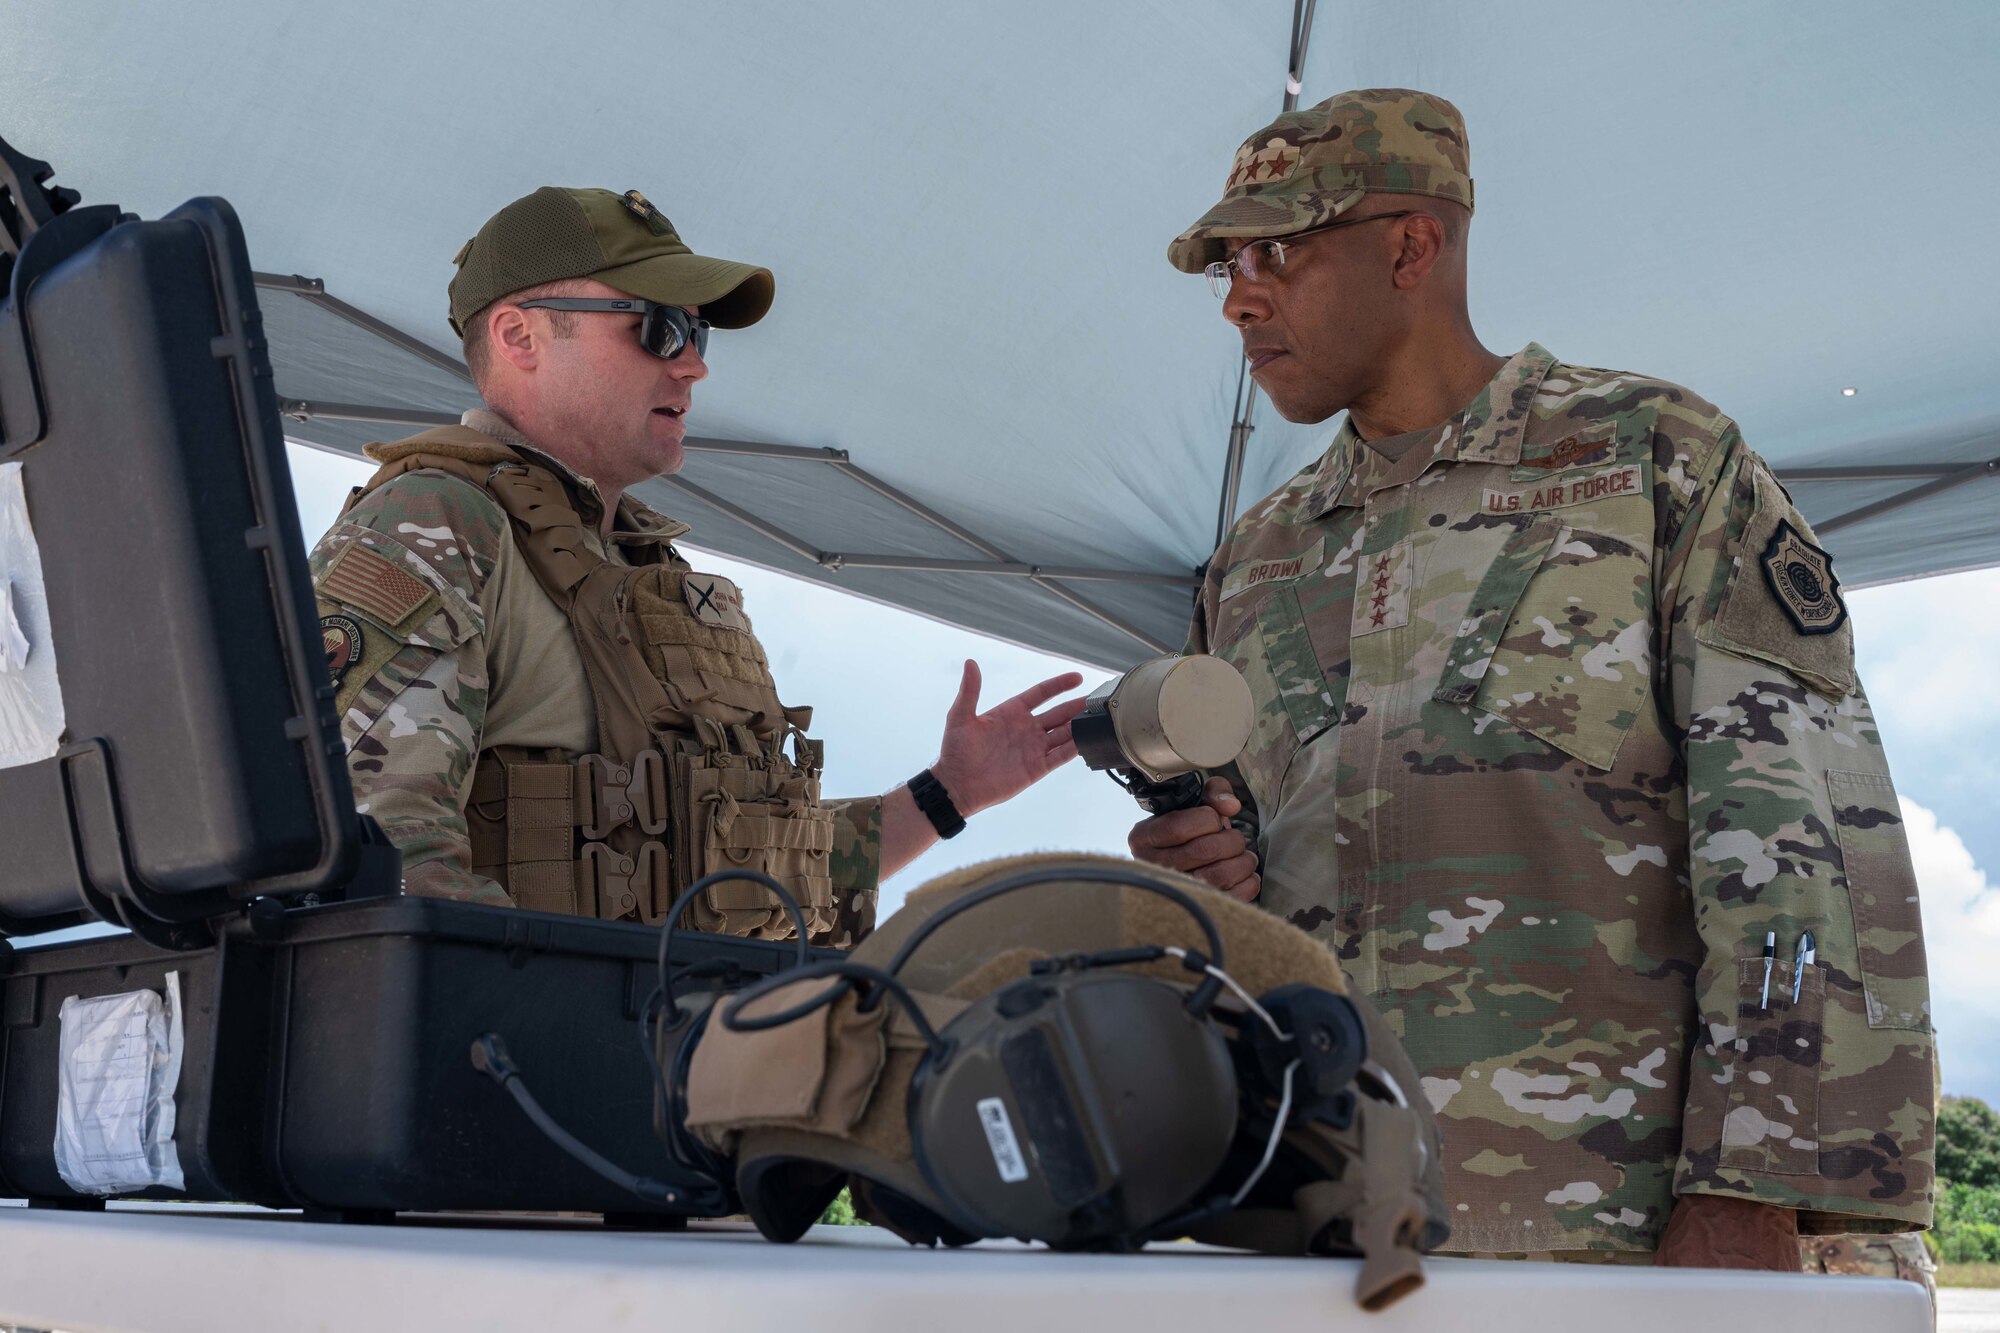 U.S. Air Force Chief of Staff Gen. CQ Brown, Jr. is briefed by U.S. Air Force Maj. John Newman, 736th Security Forces Squadron Commander, about the capabilities Air Force personnel in Guam bring to the Indo-Pacific region at Northwest Field, Guam, Aug. 7, 2022.